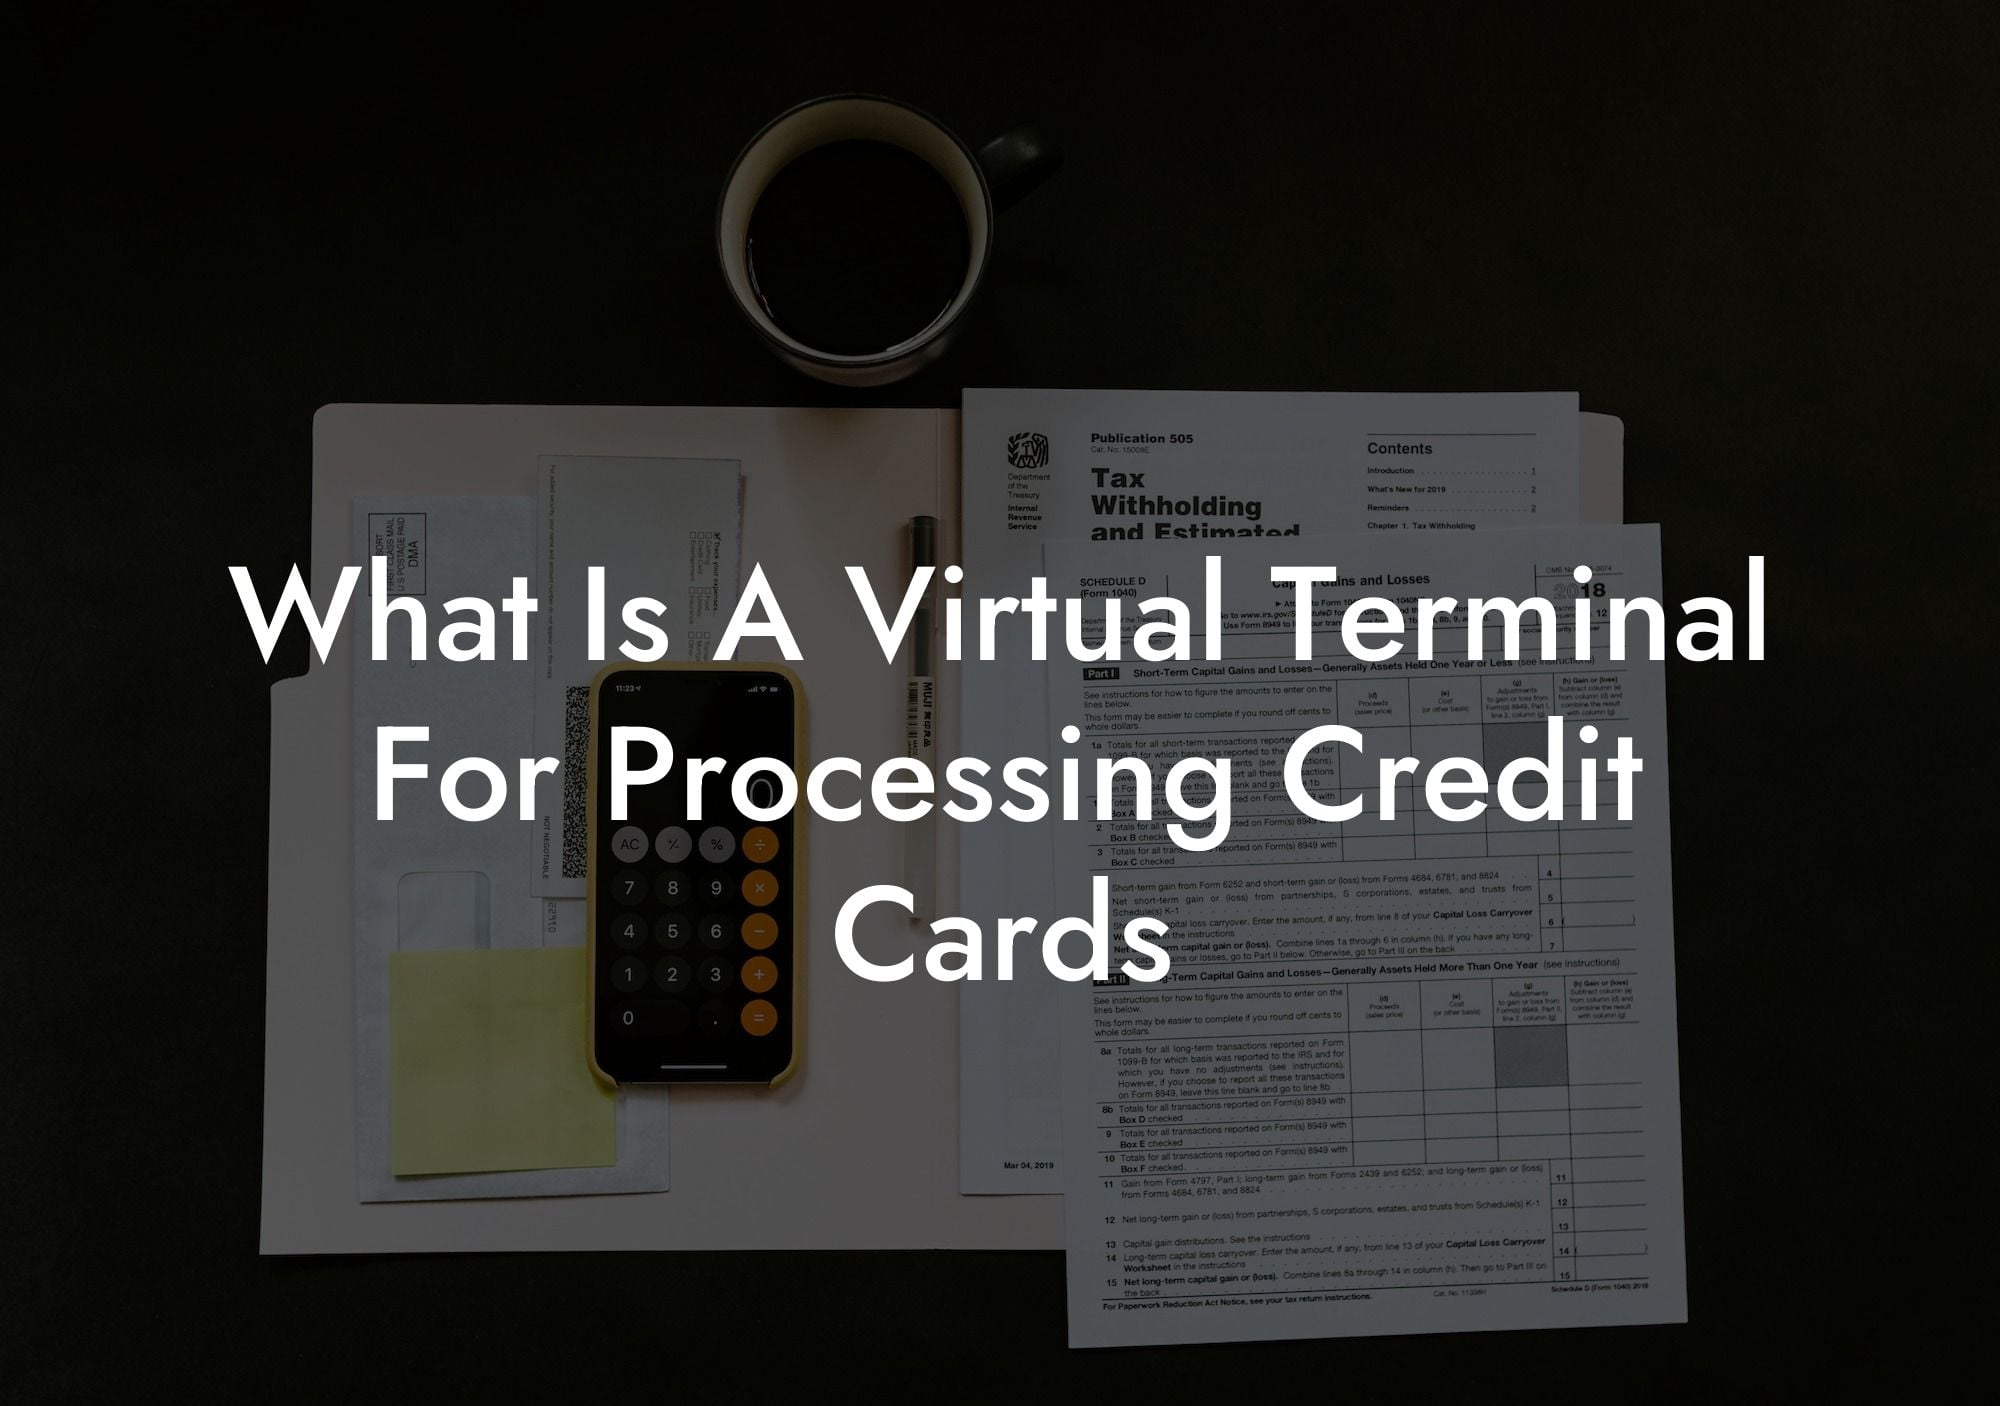 What Is A Virtual Terminal For Processing Credit Cards